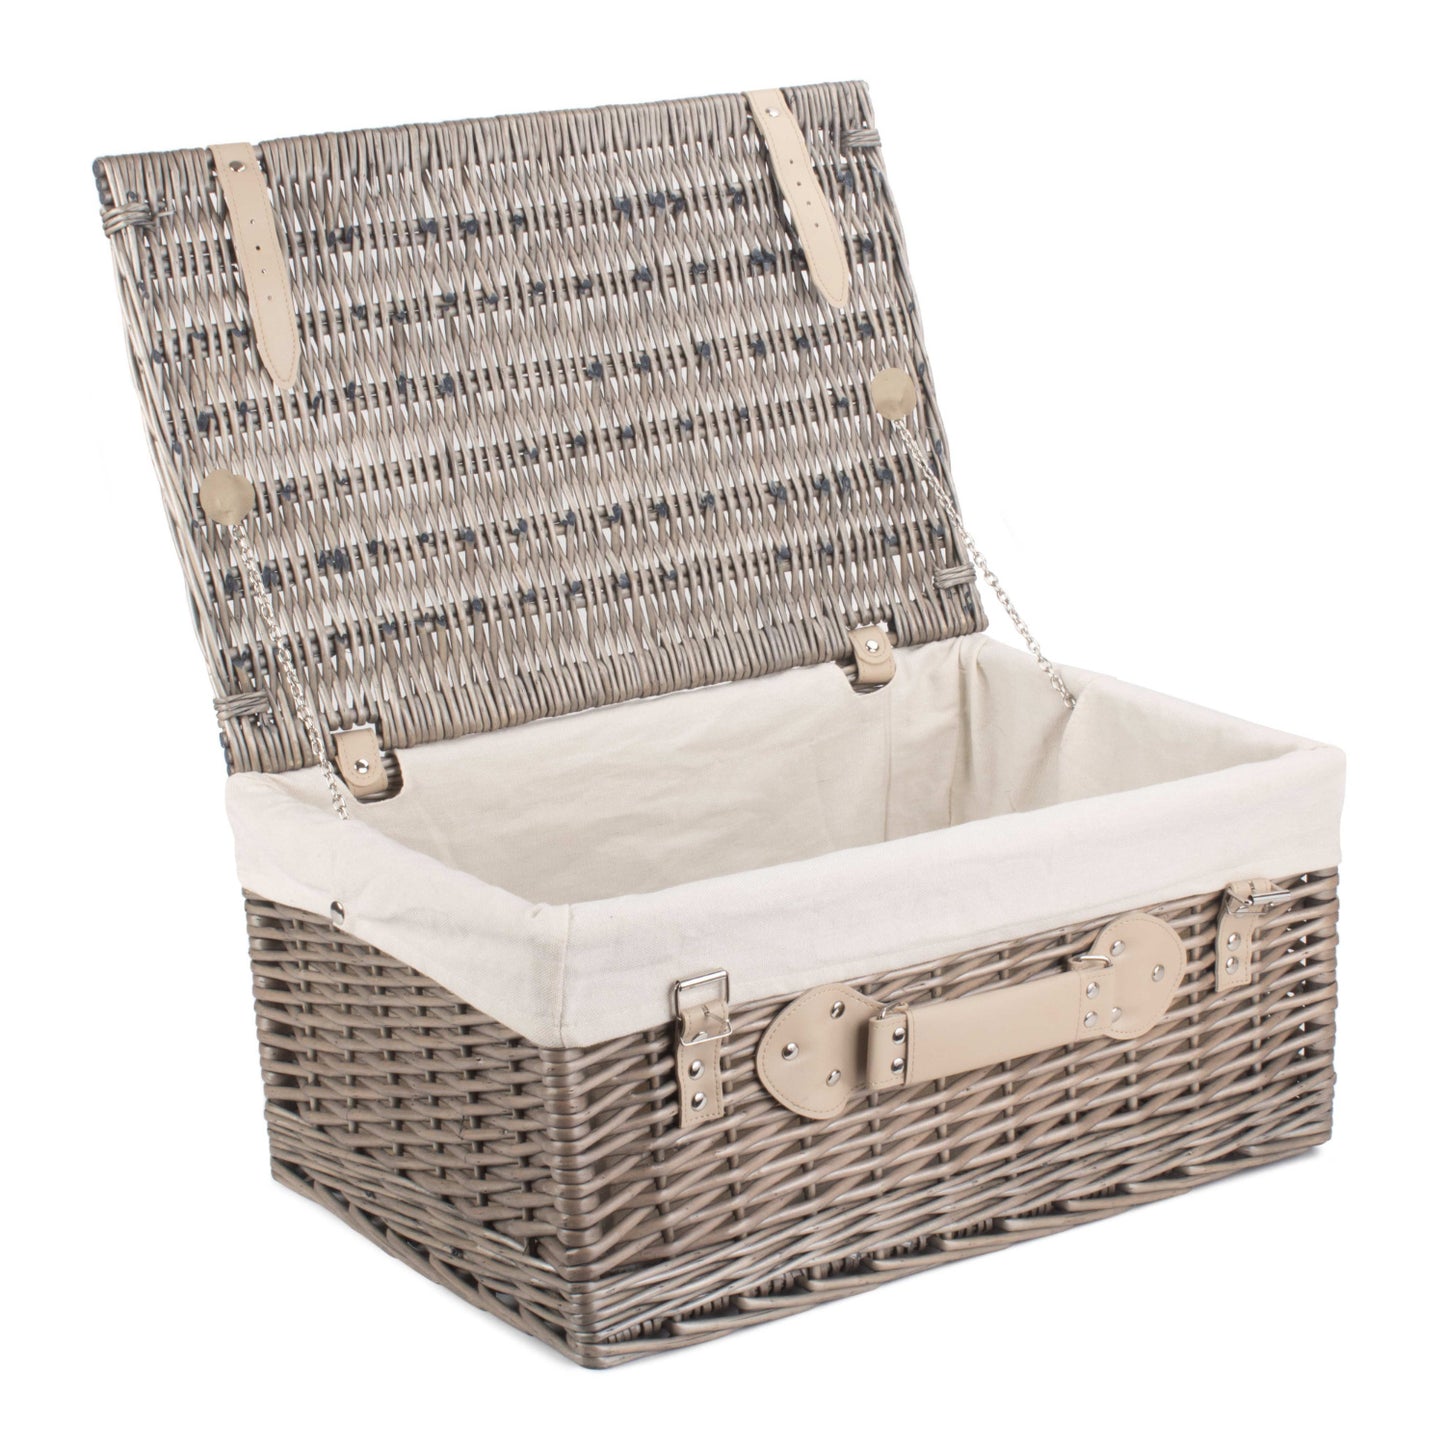 20 Inch Antique Wash Hamper With White Lining